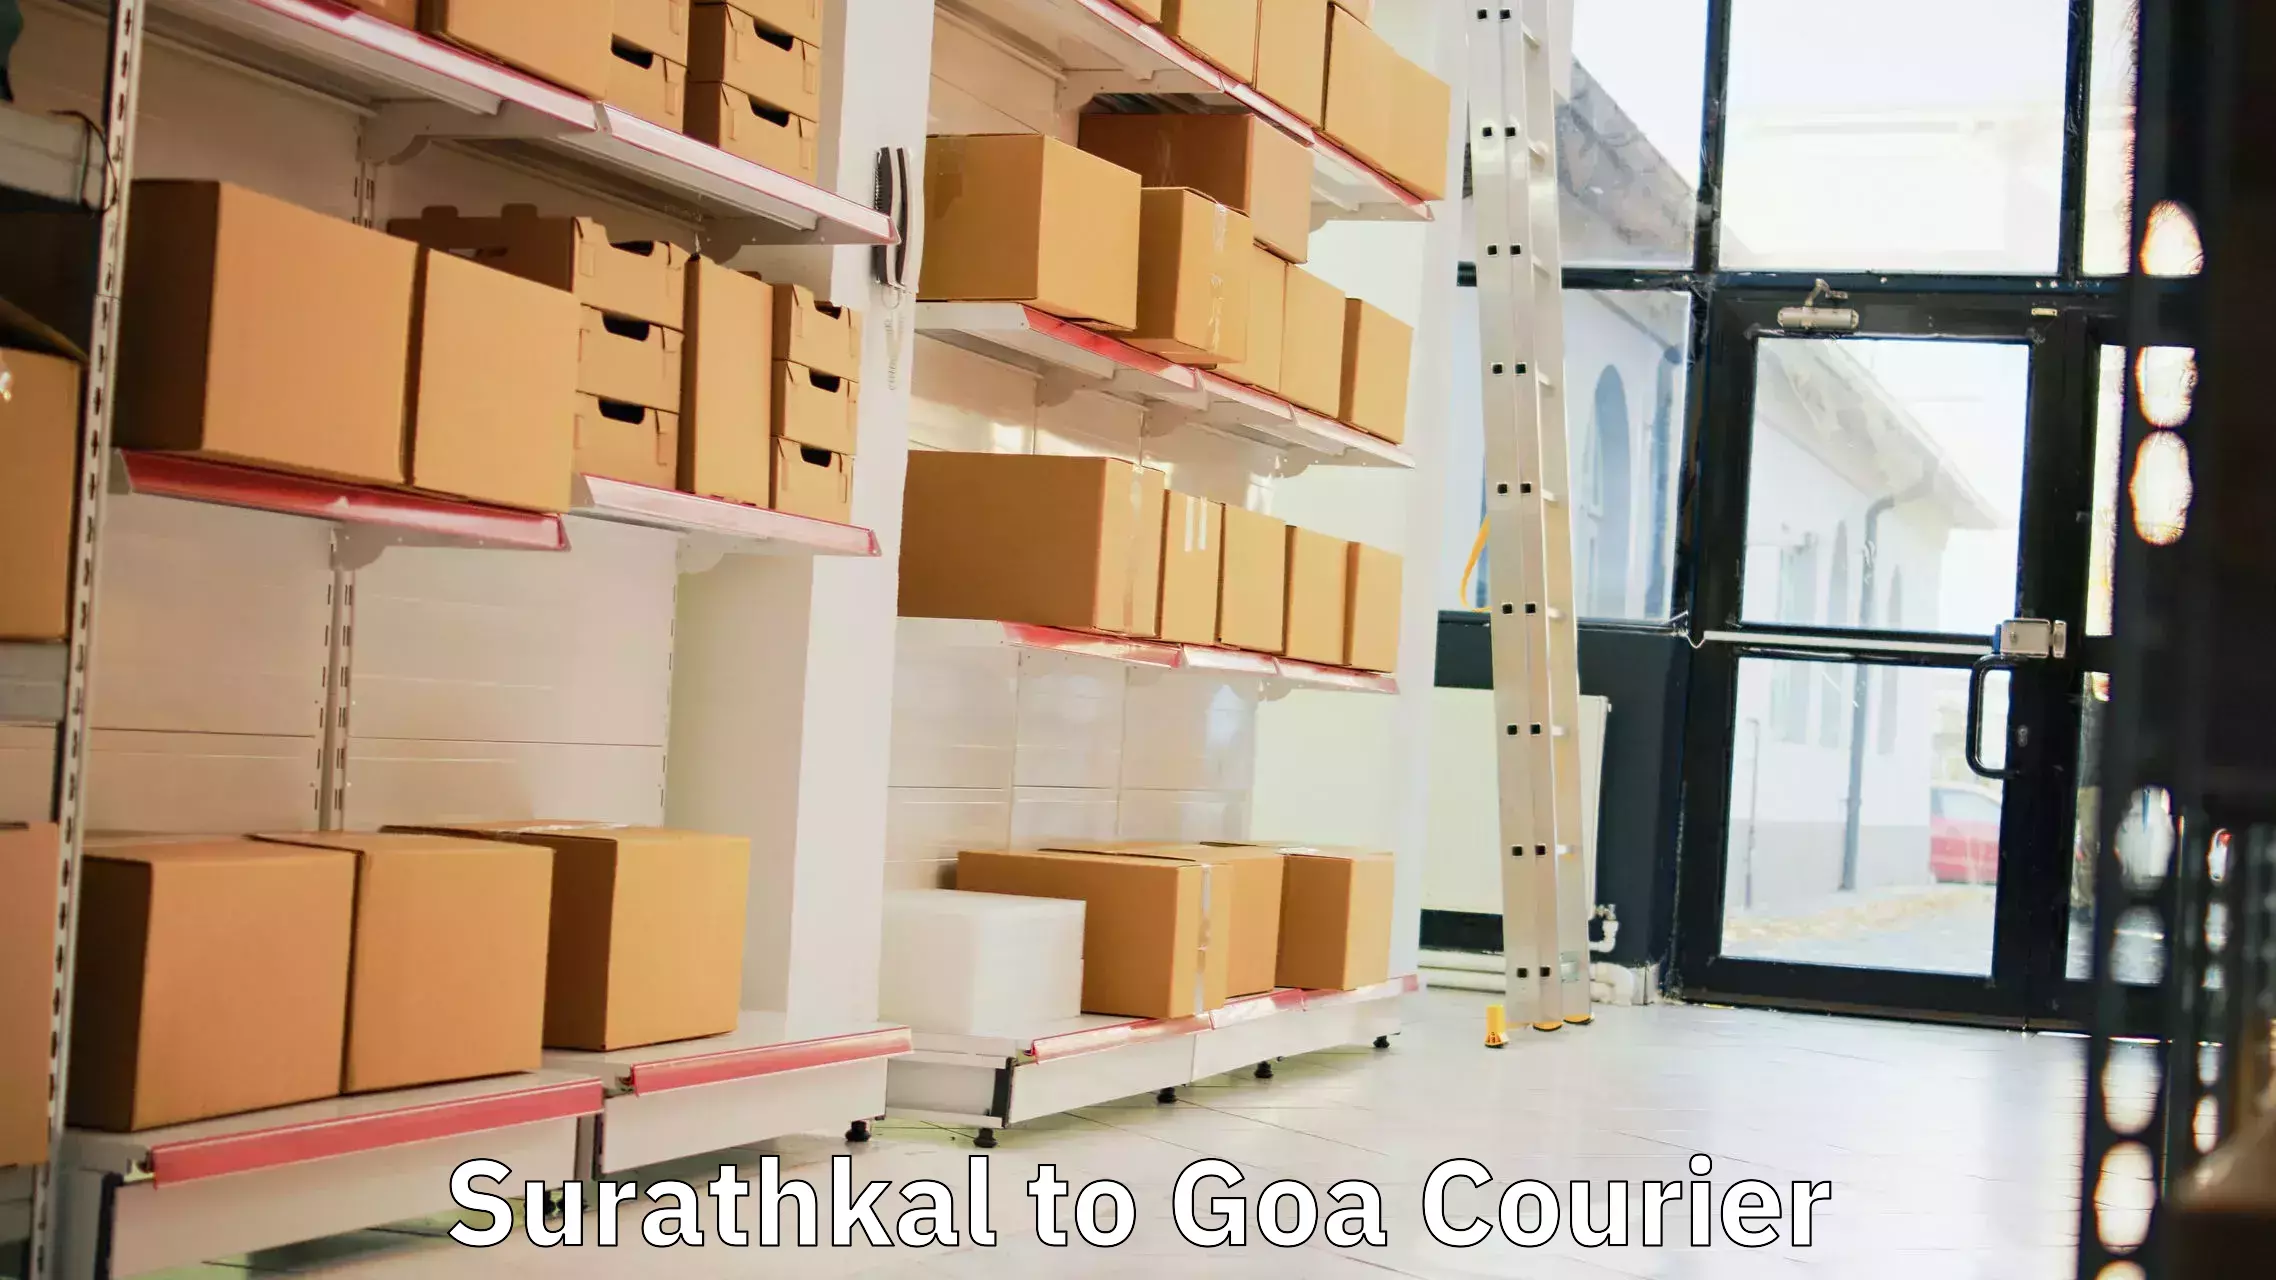 Flexible delivery schedules Surathkal to Goa